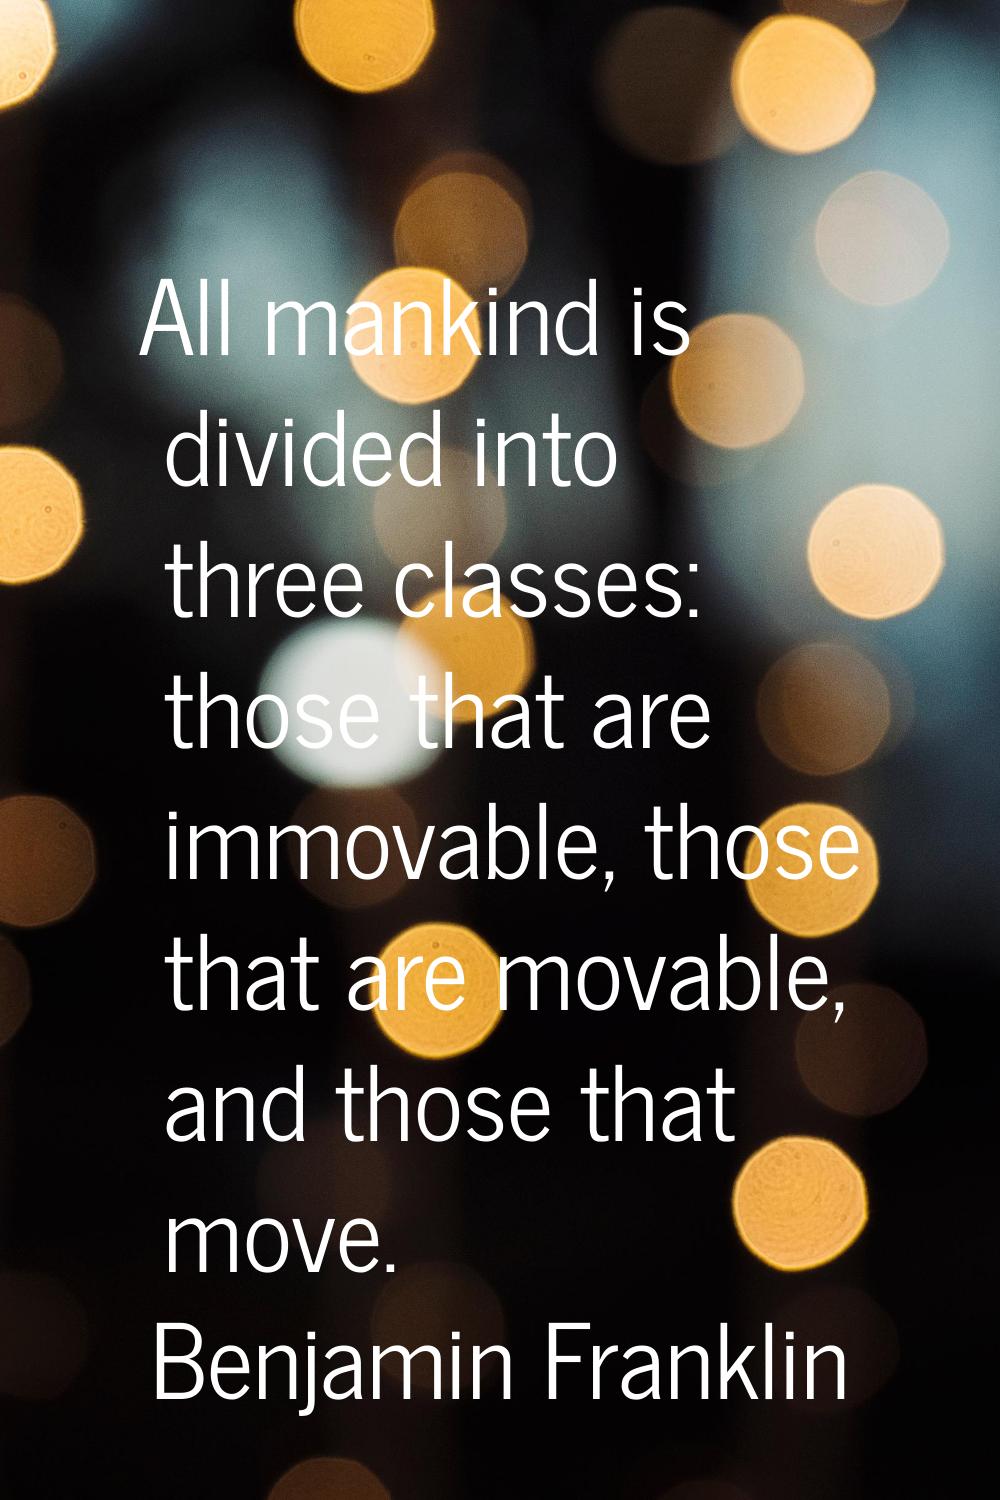 All mankind is divided into three classes: those that are immovable, those that are movable, and th